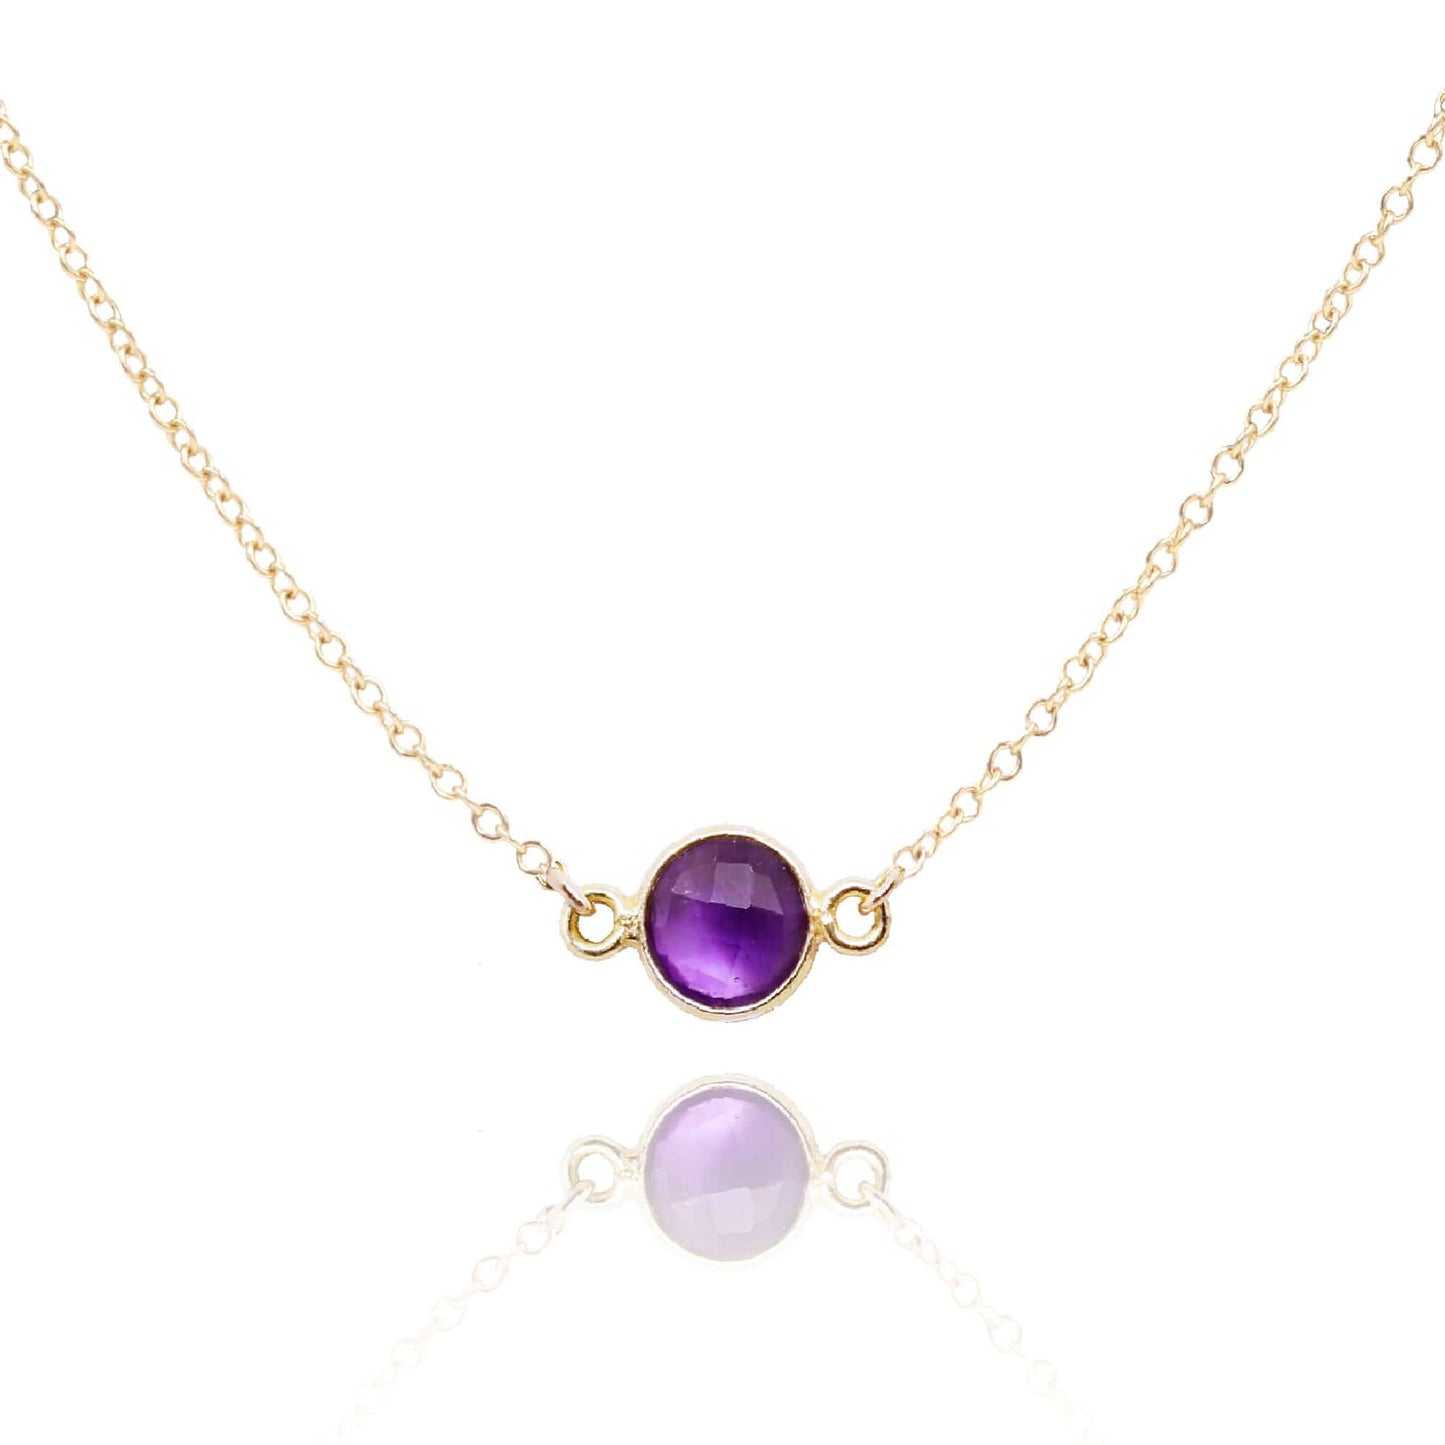 Close up of a genuine amethyst 14k gold filled necklace - MaeMae Jewelry